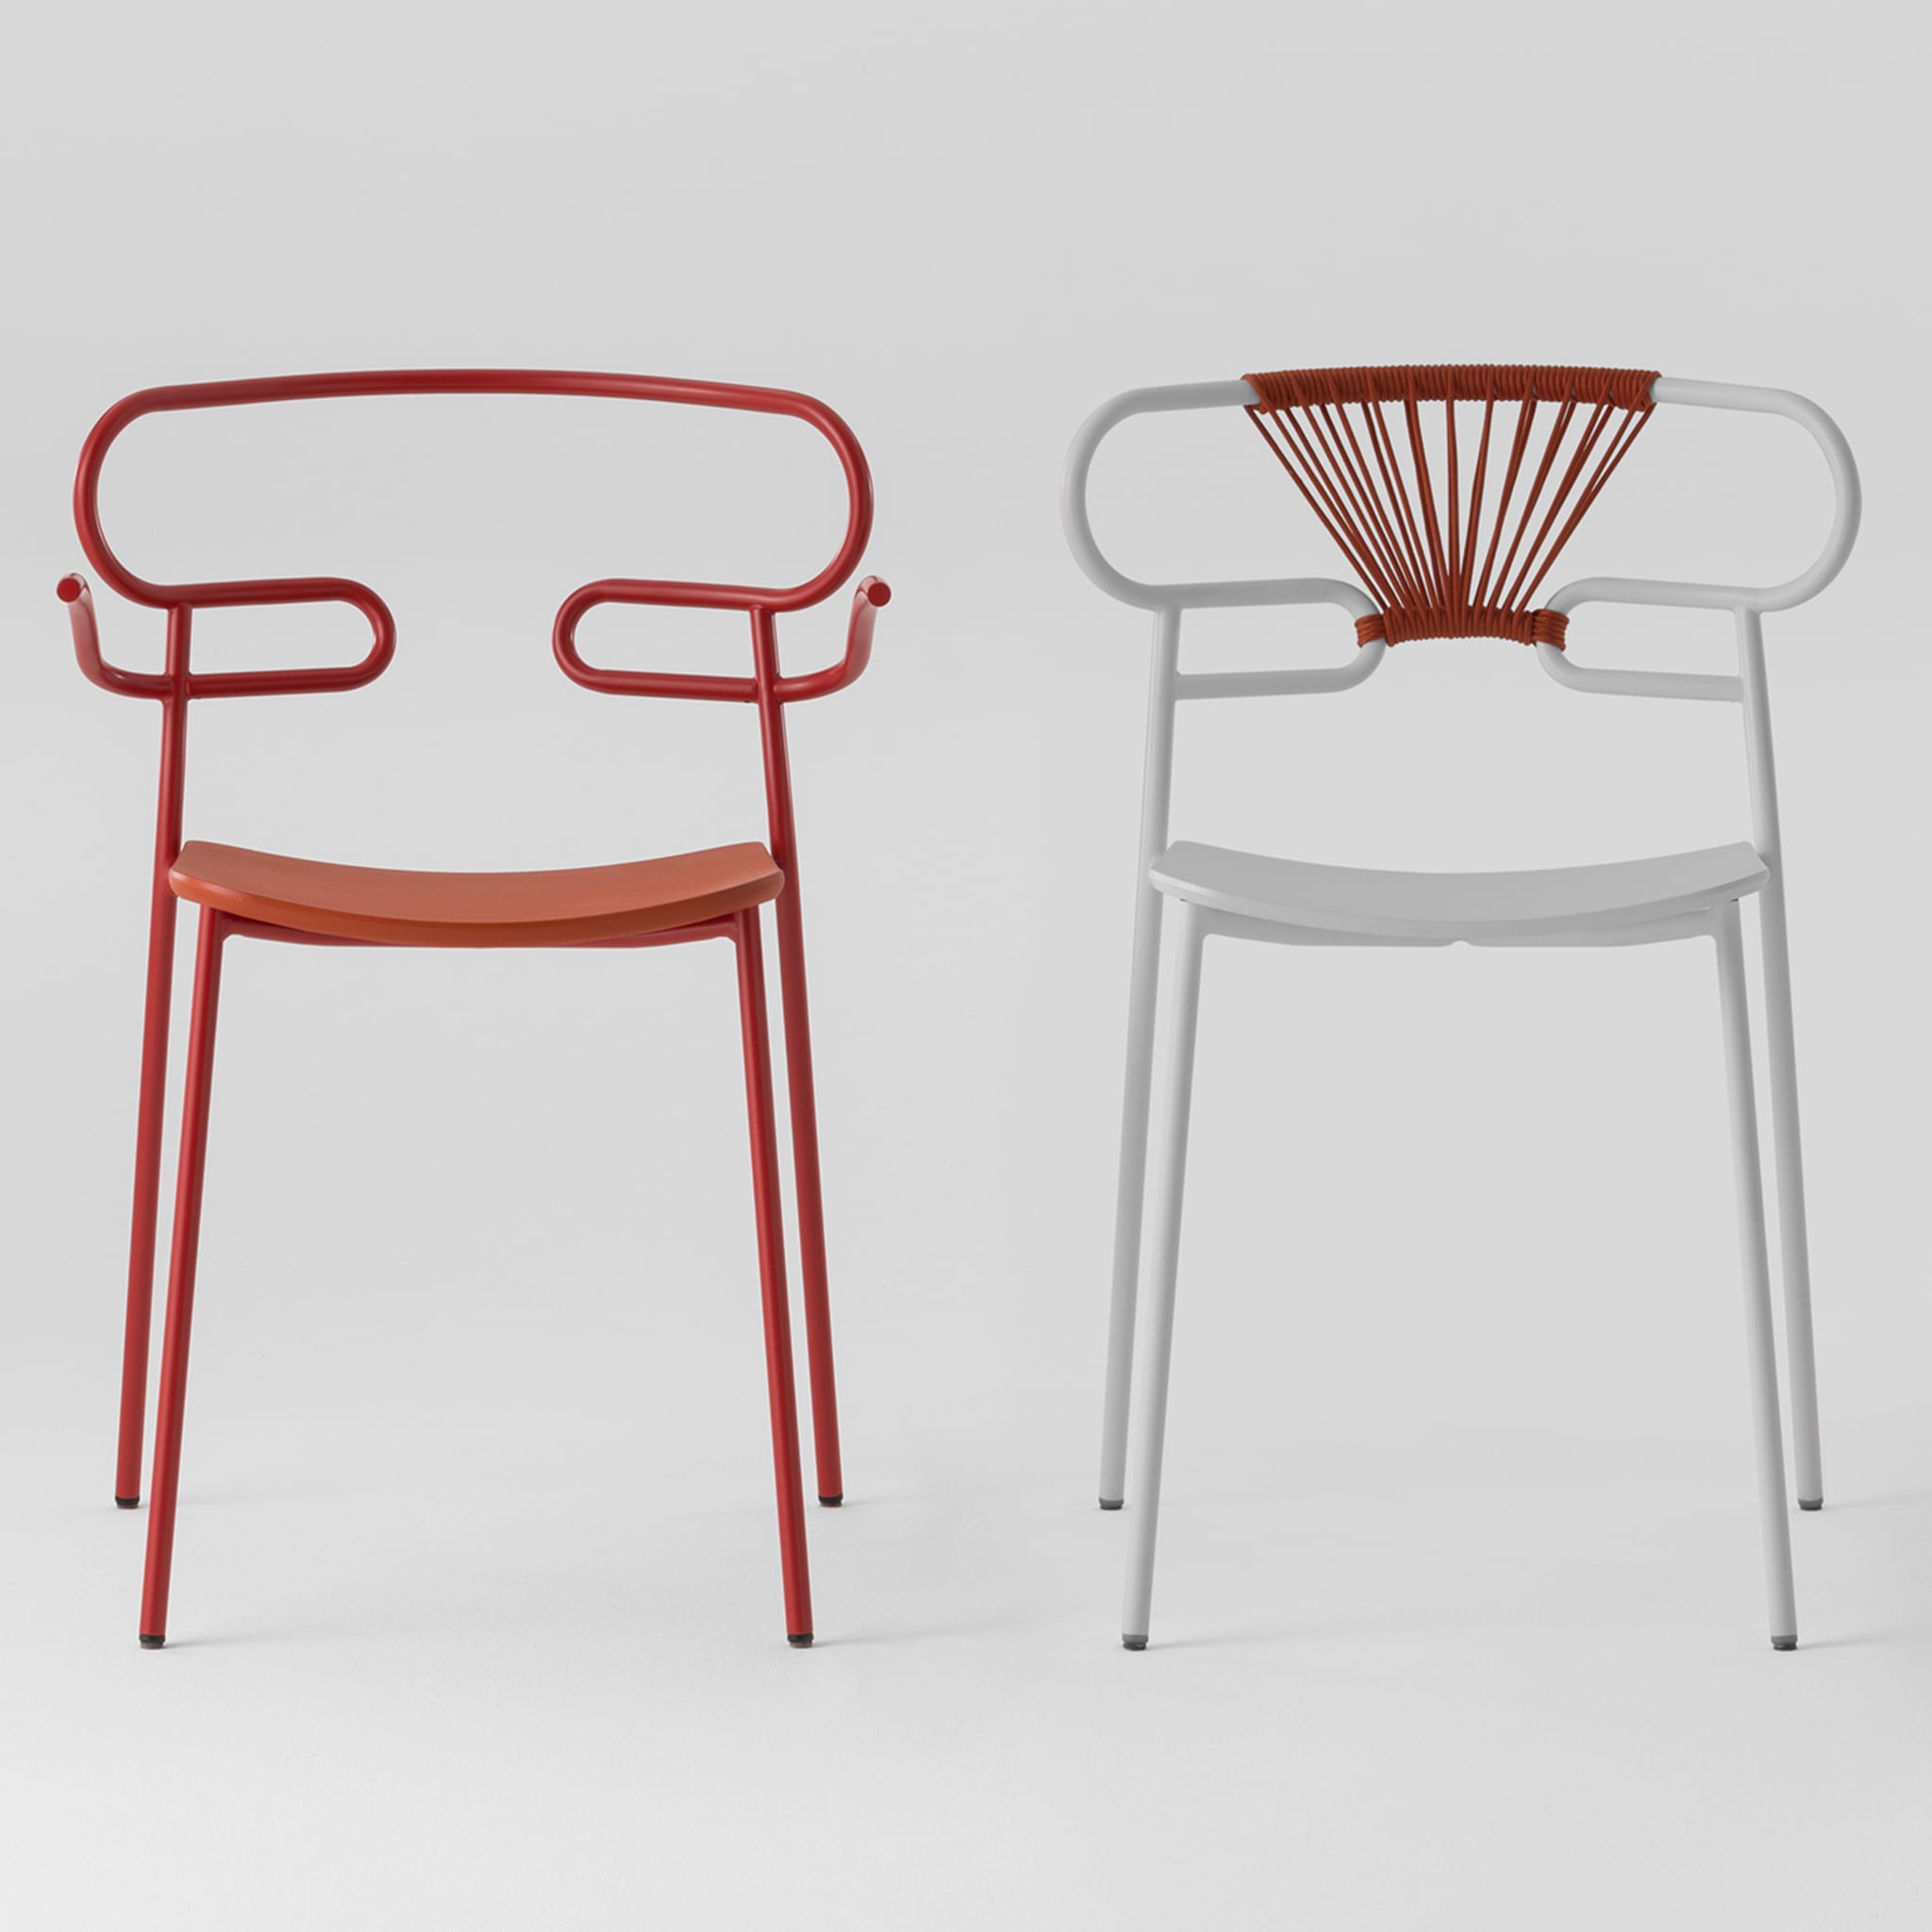 Genoa Red Armchair by Cesare Ehr - Alternative view 1